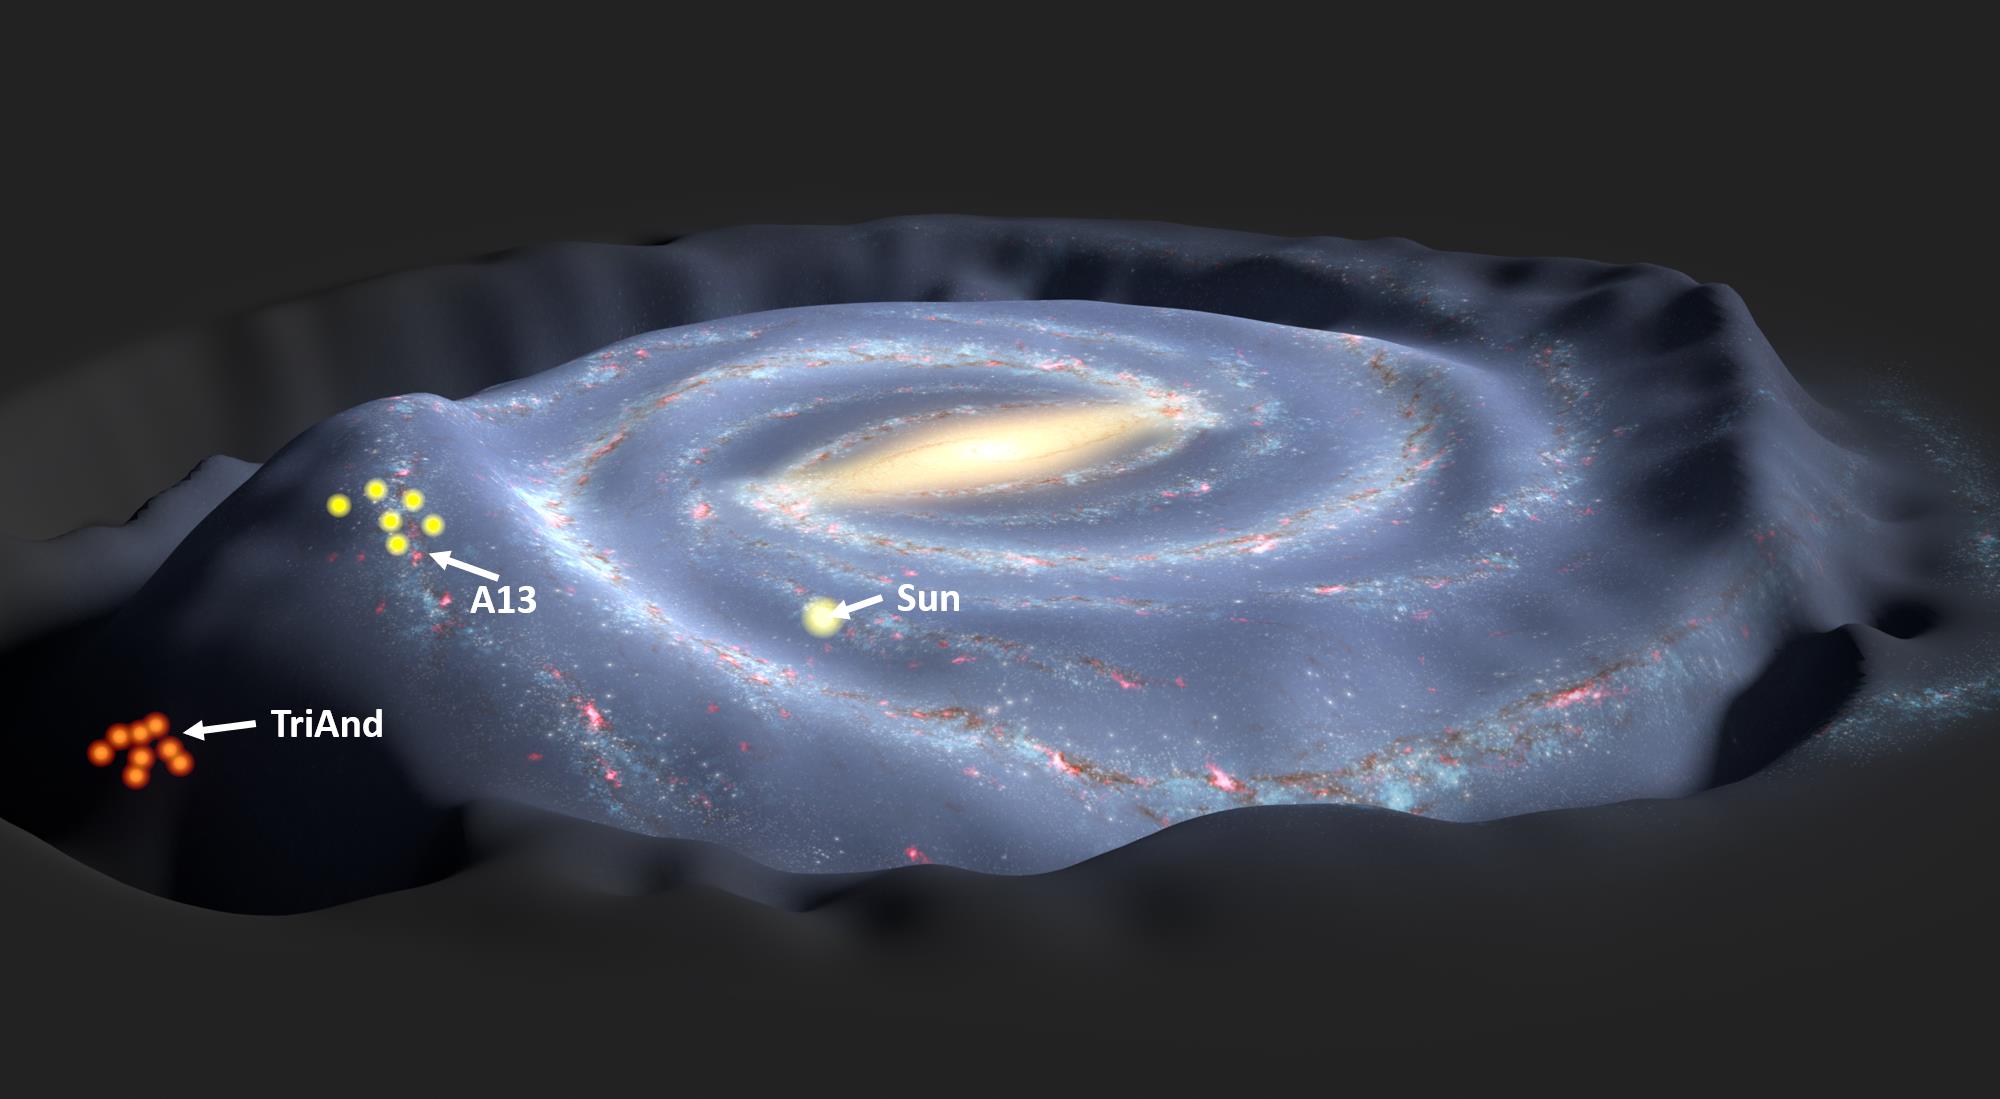 Stars in the Milky Way halo: Cosmic invaders or victims of galactic eviction?